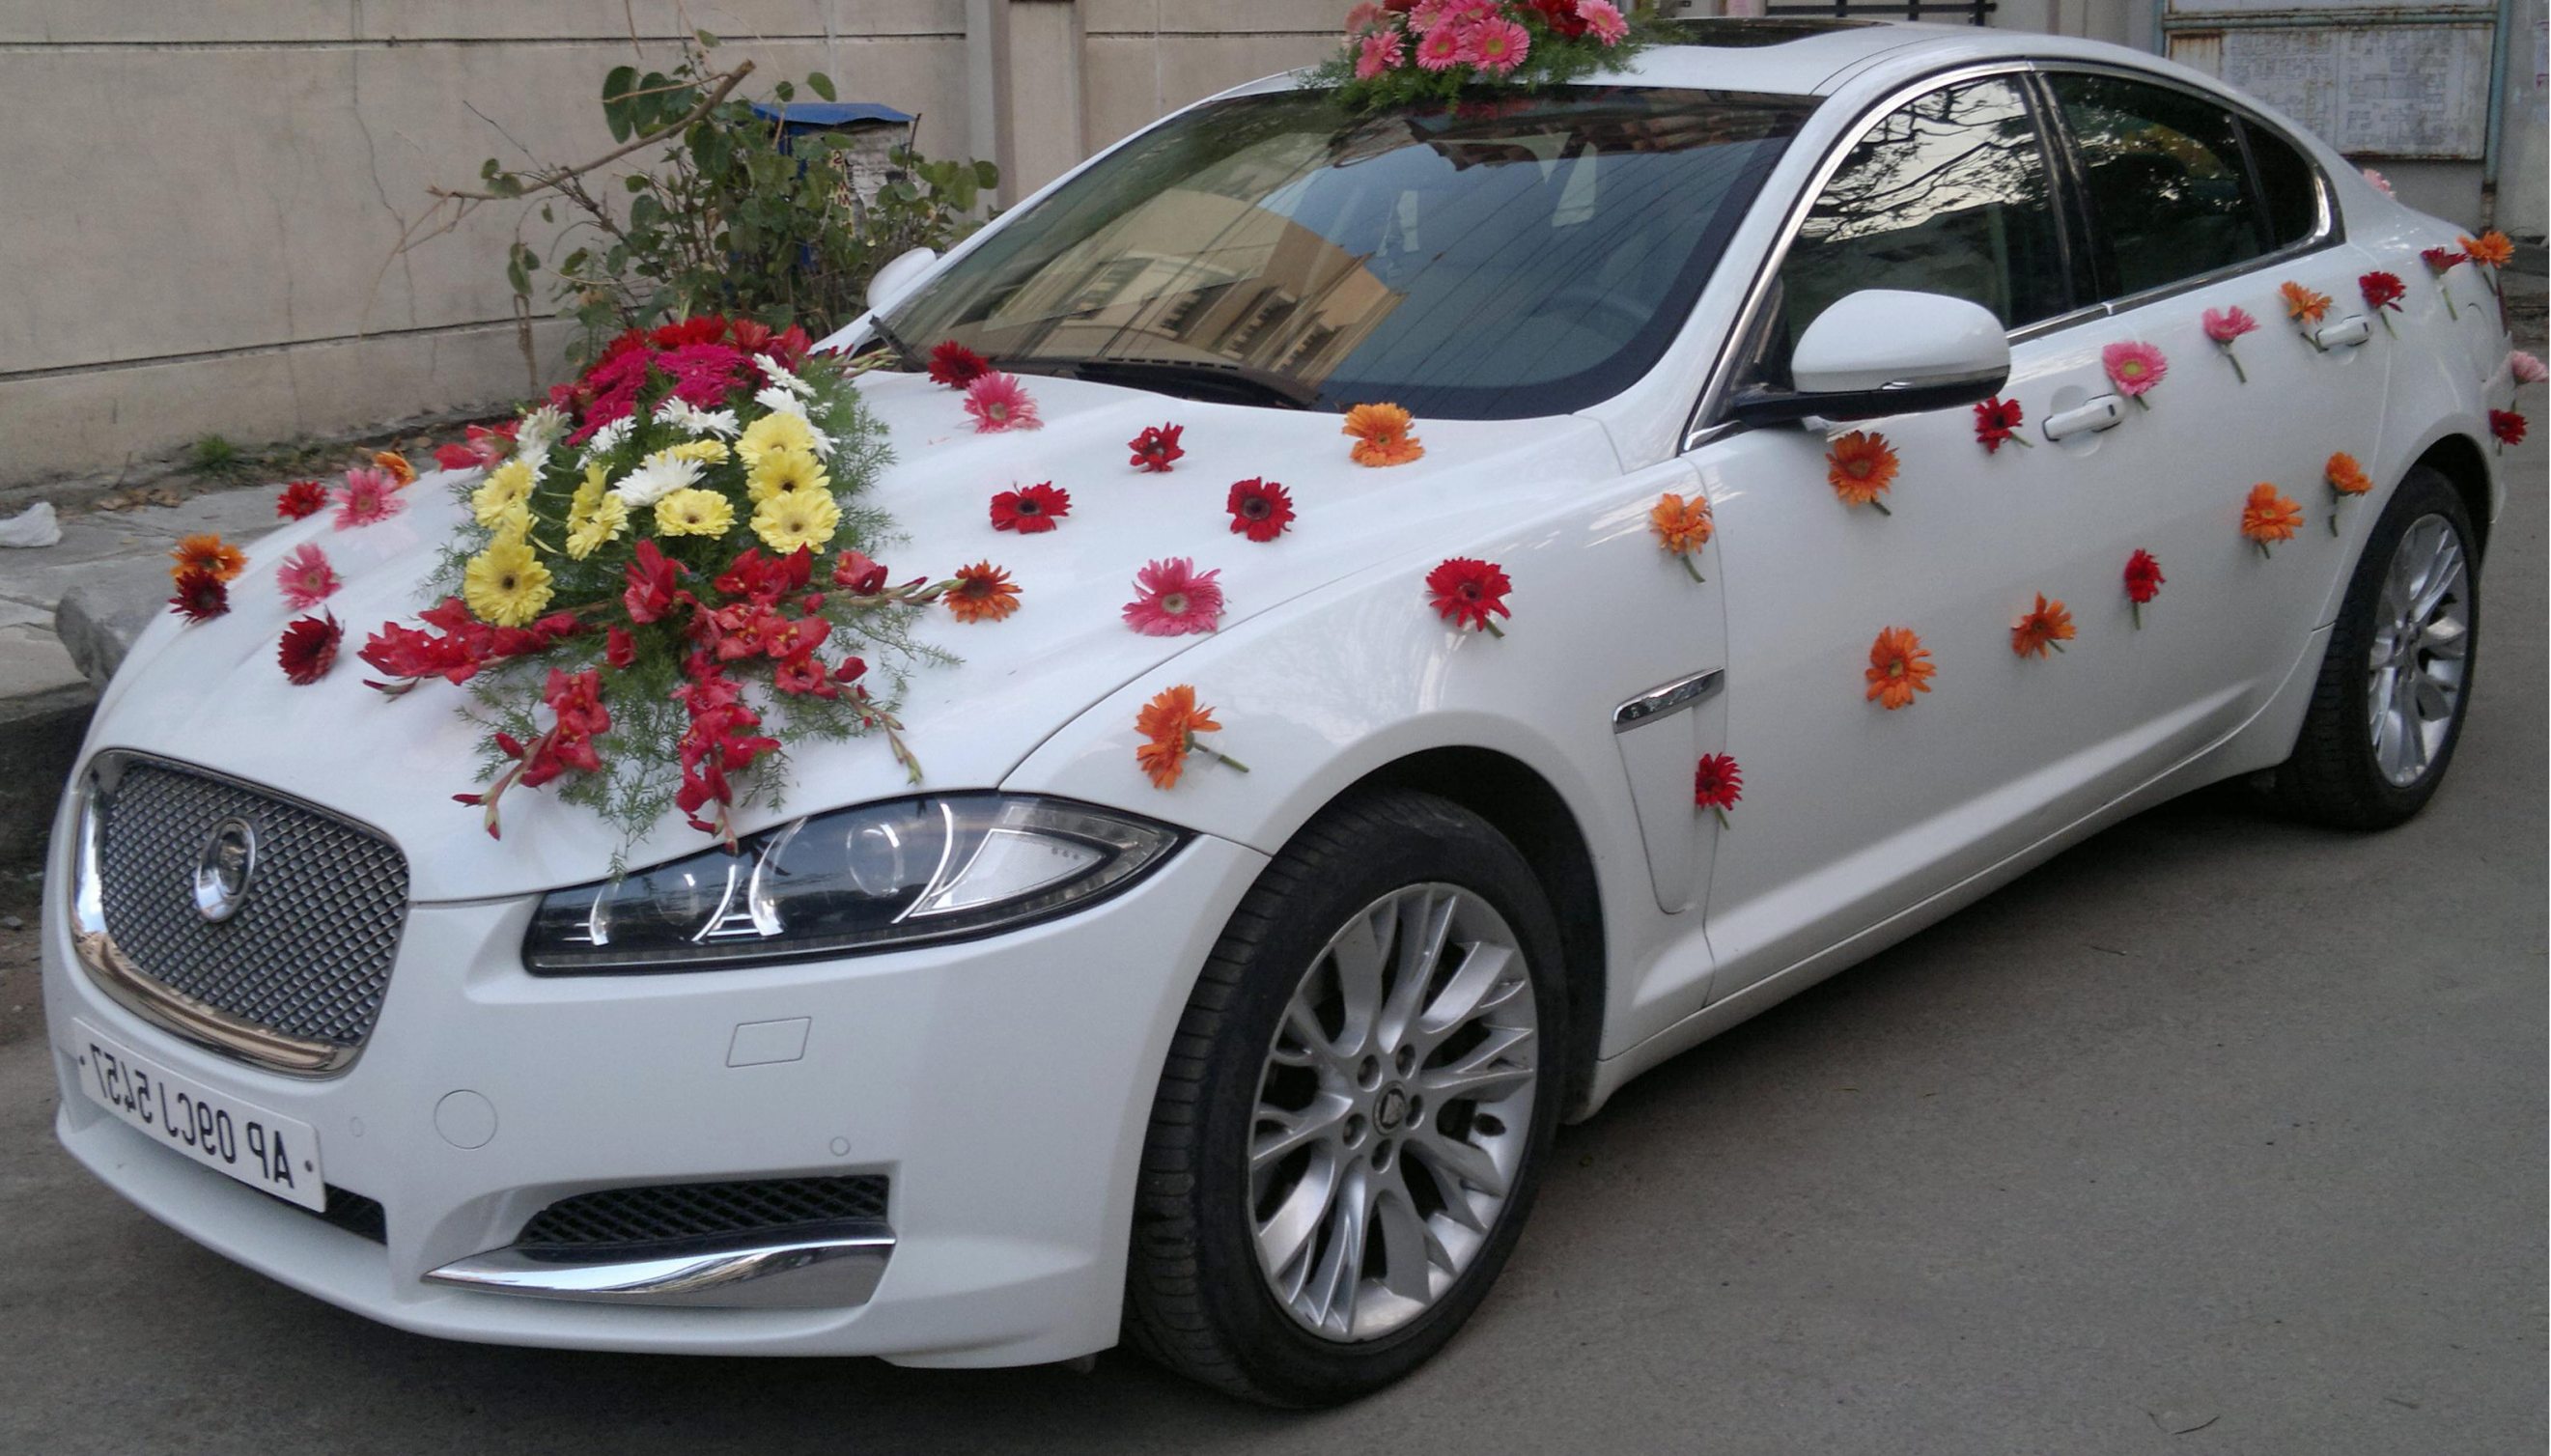 Exceptional Decorate The Car #12 Decorated Cars For Wedding Gallery ...